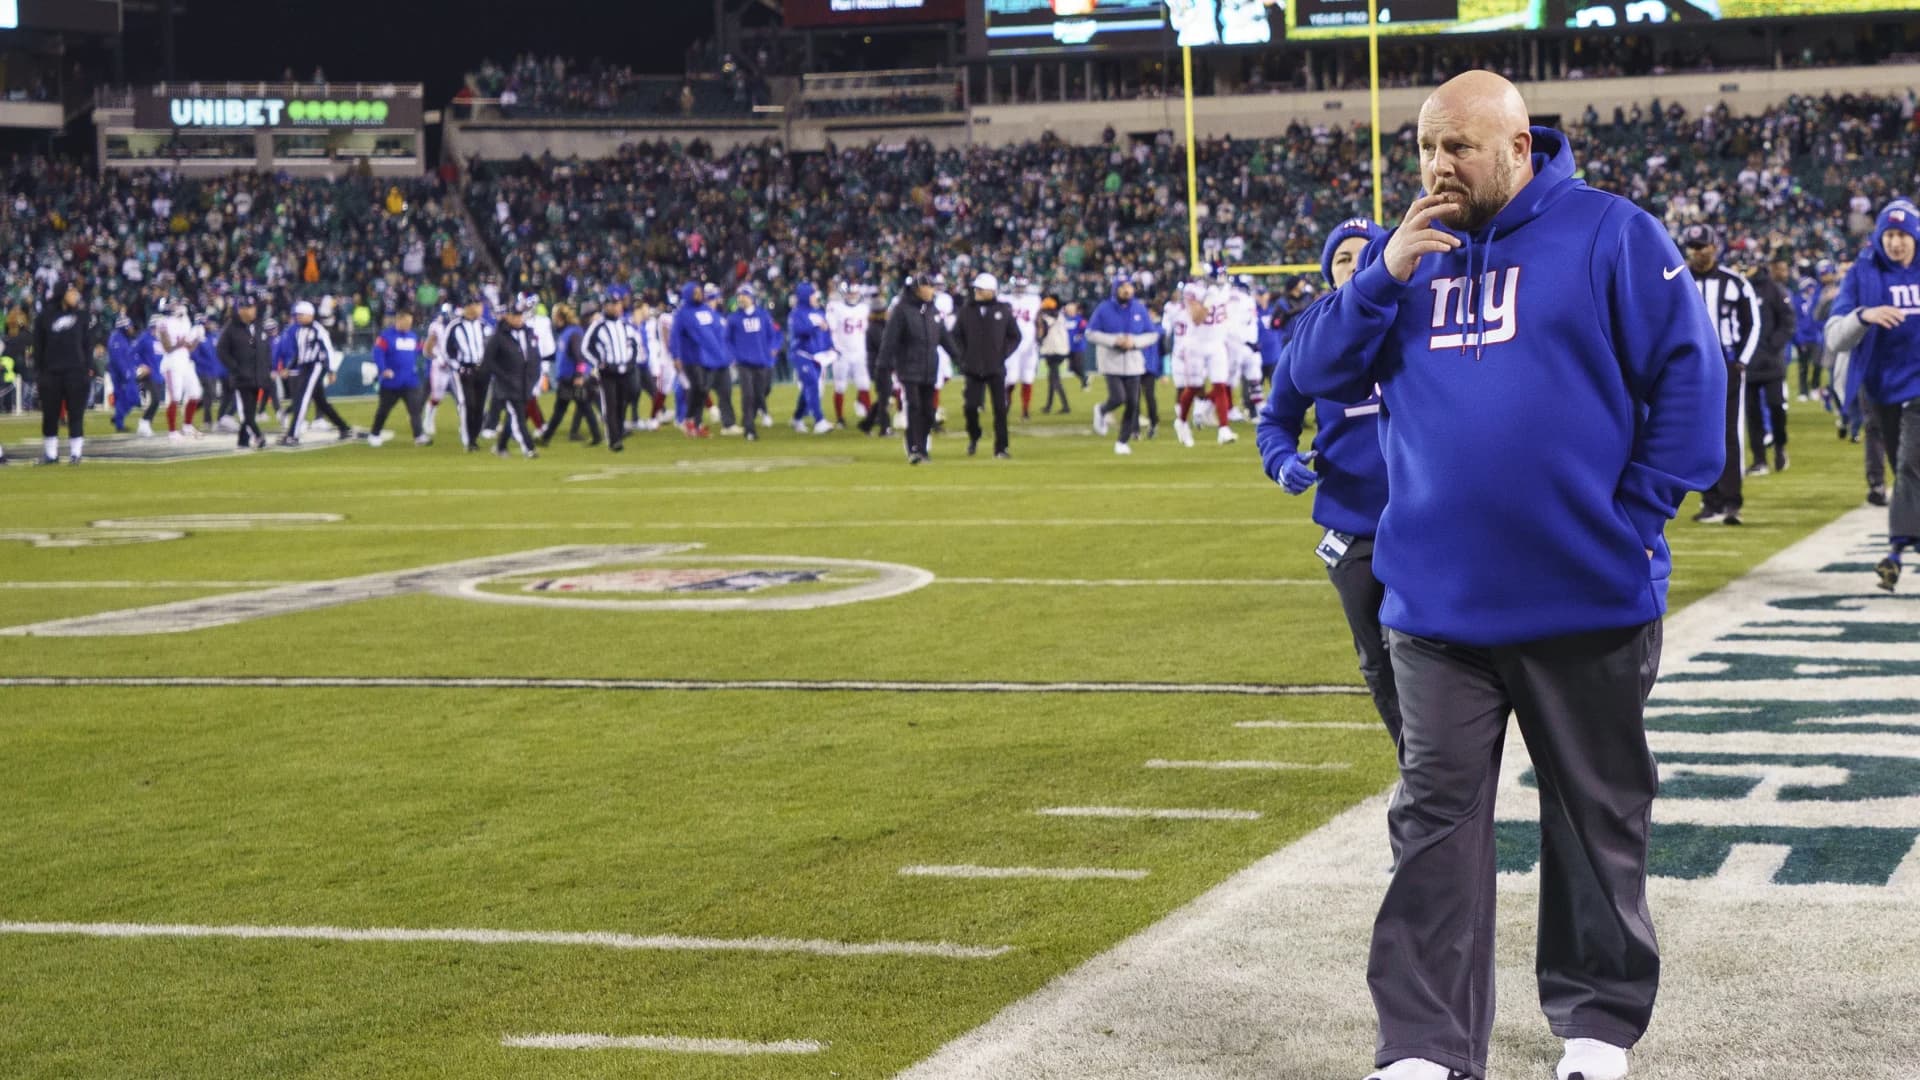 After playoff run, Giants face decisions on Jones, Barkley